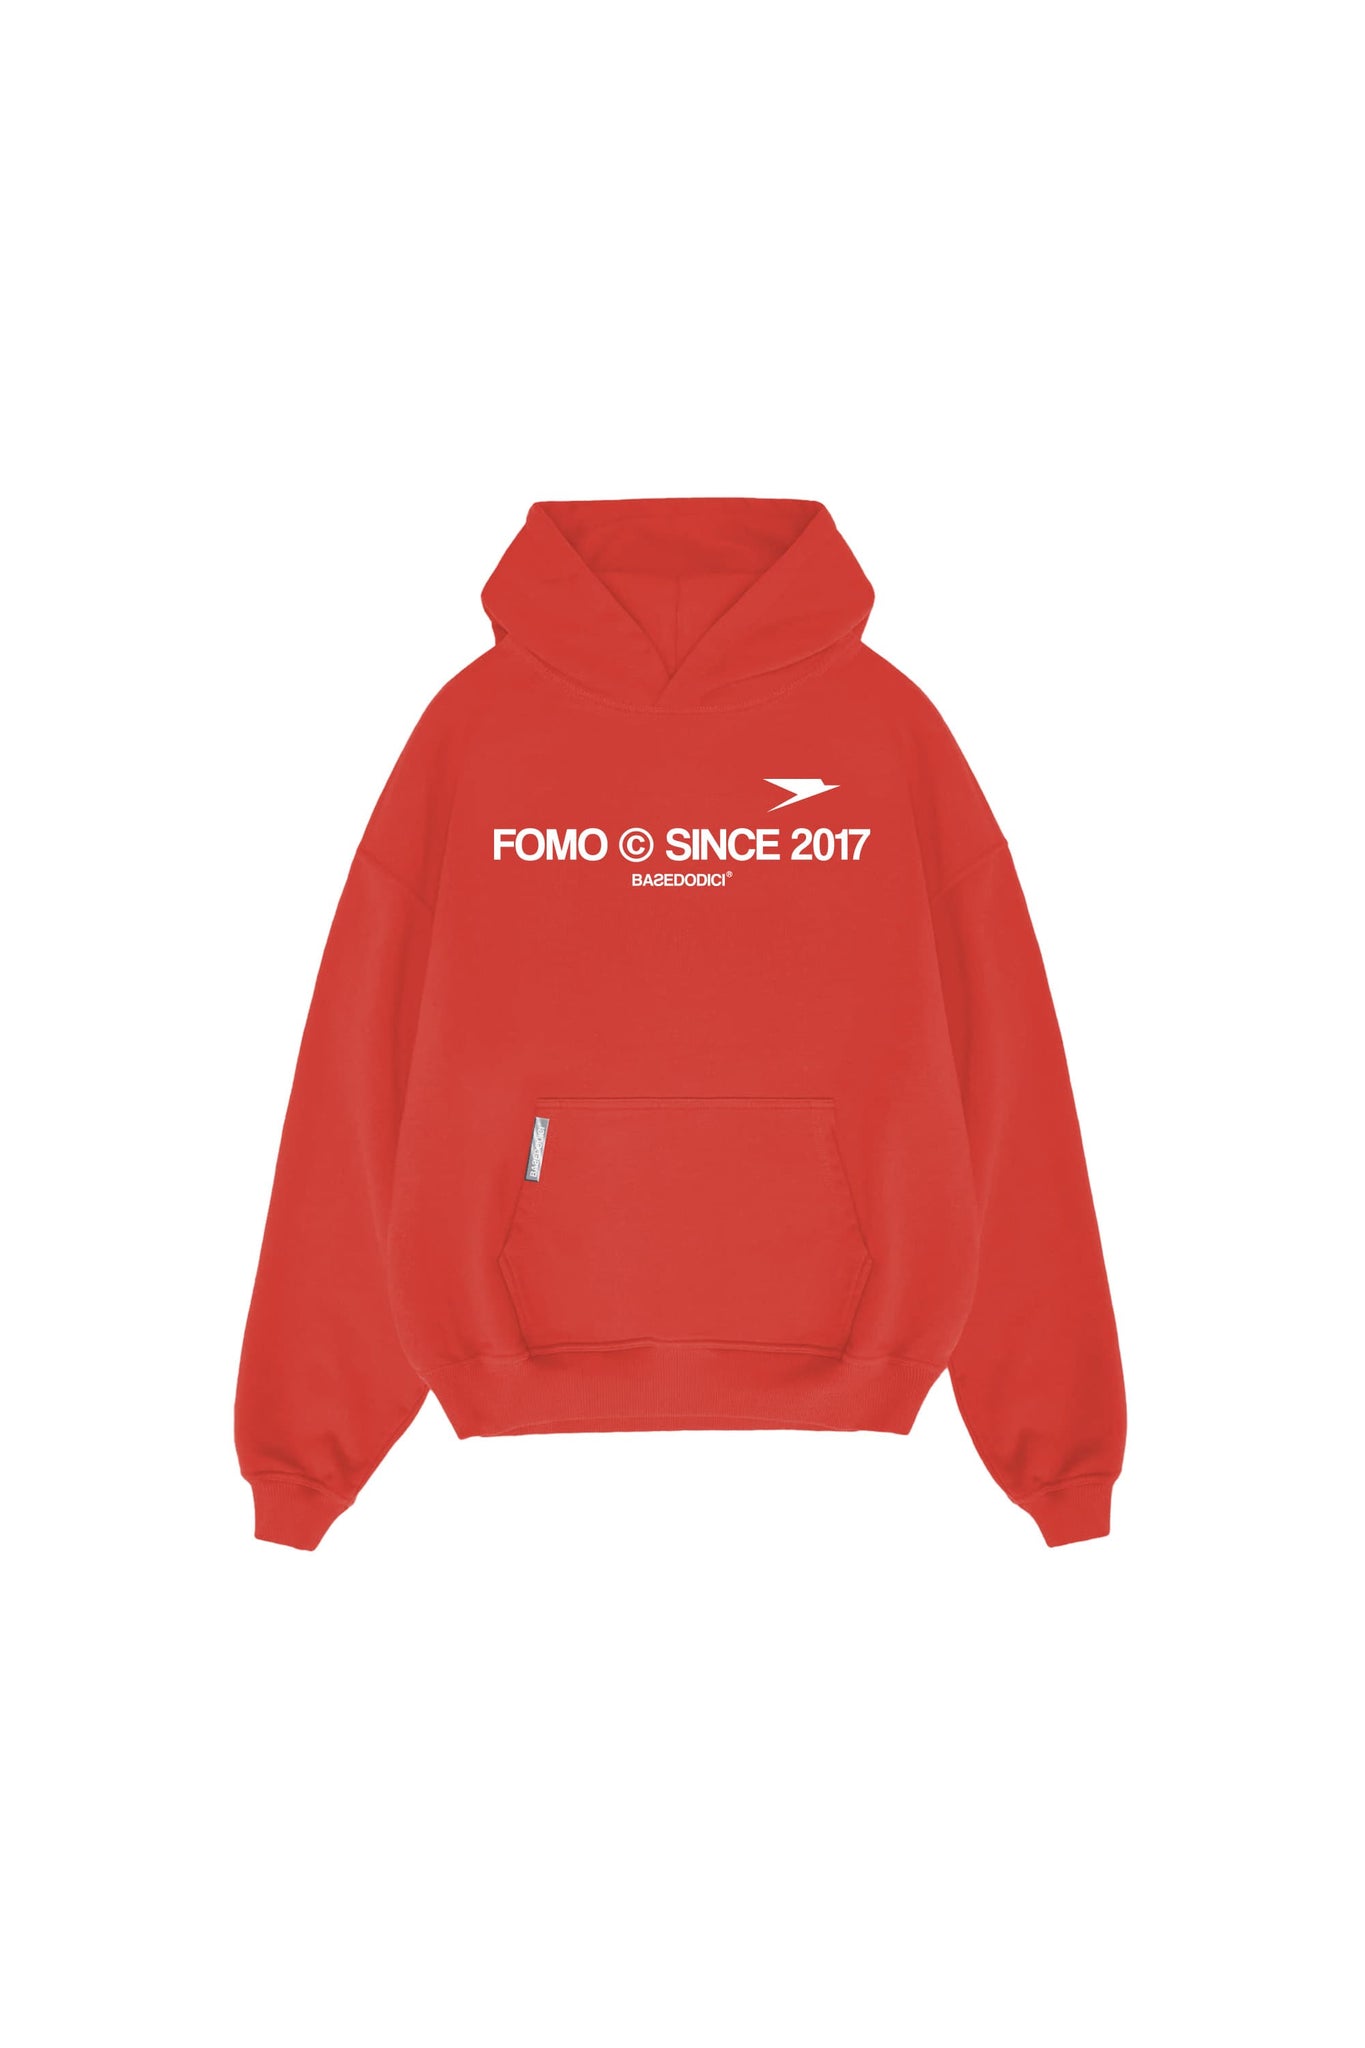 Hoodie "FOMO" Since2017 Red